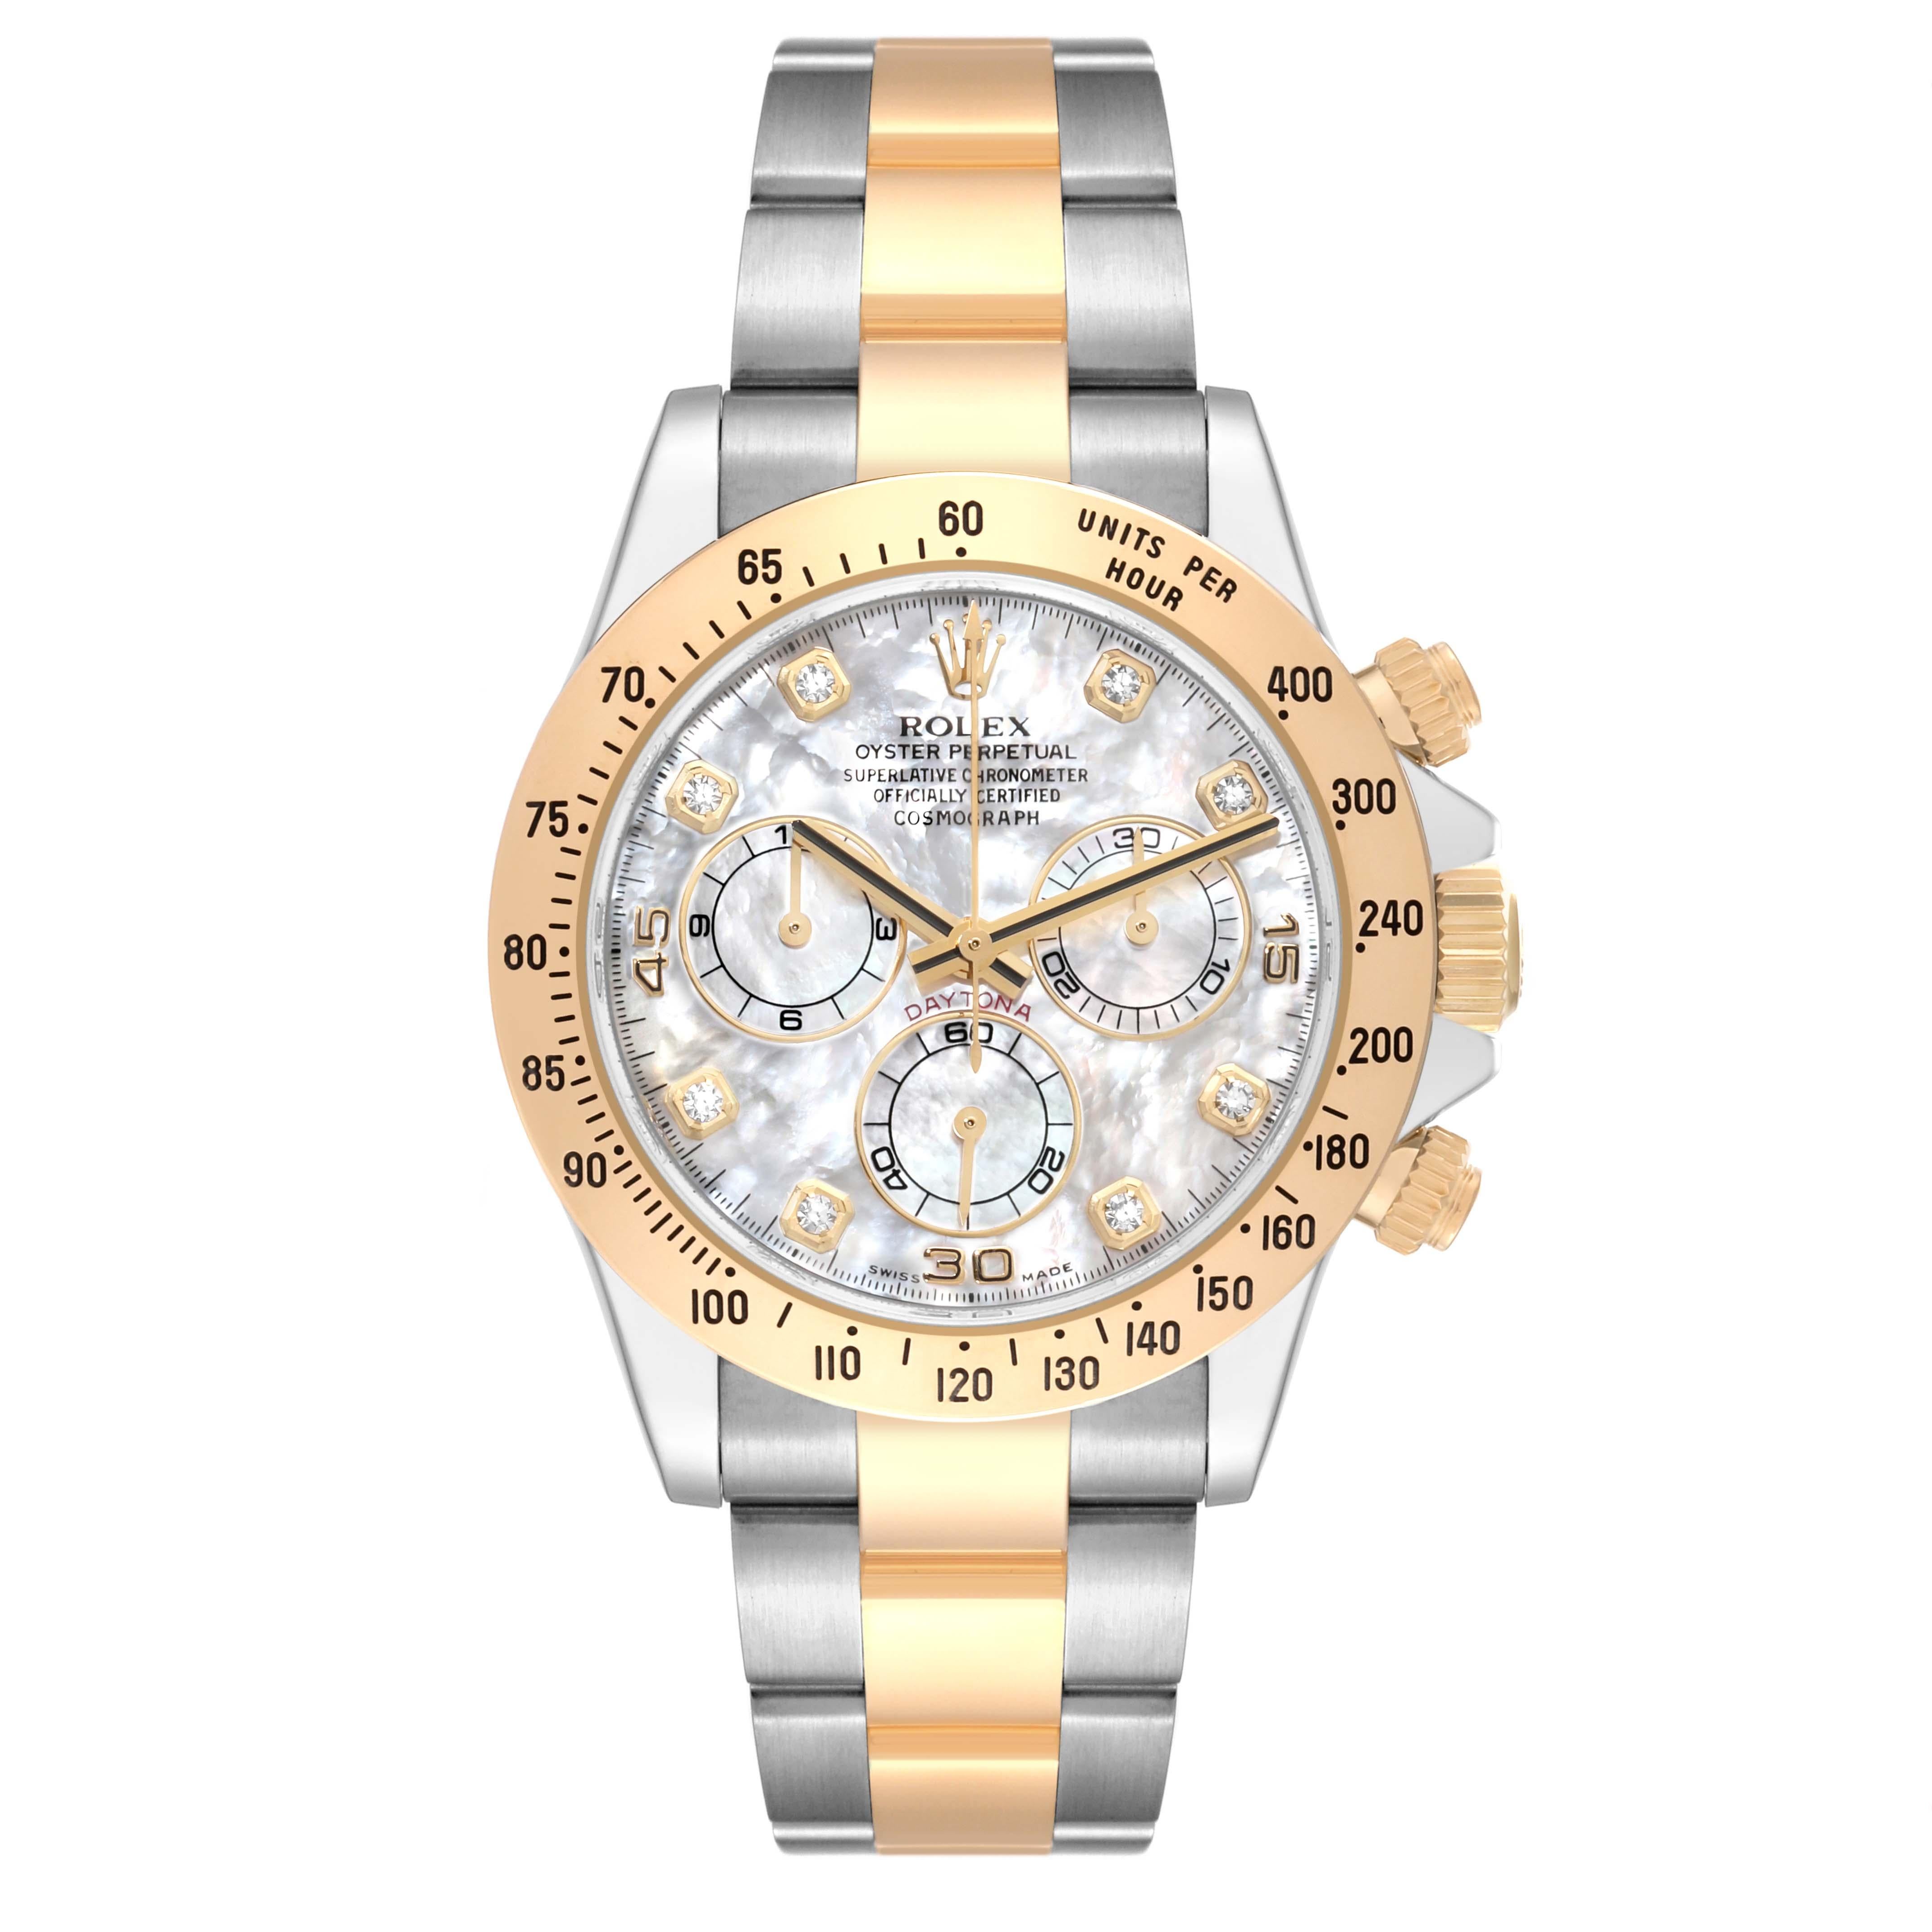 Rolex Daytona Yellow Gold Steel Mother of Pearl Diamond Mens Watch 116523 Box Card. Officially certified chronometer automatic self-winding movement. Rhodium-plated, oeil-de-perdrix decoration, straight line lever escapement, monometallic balance